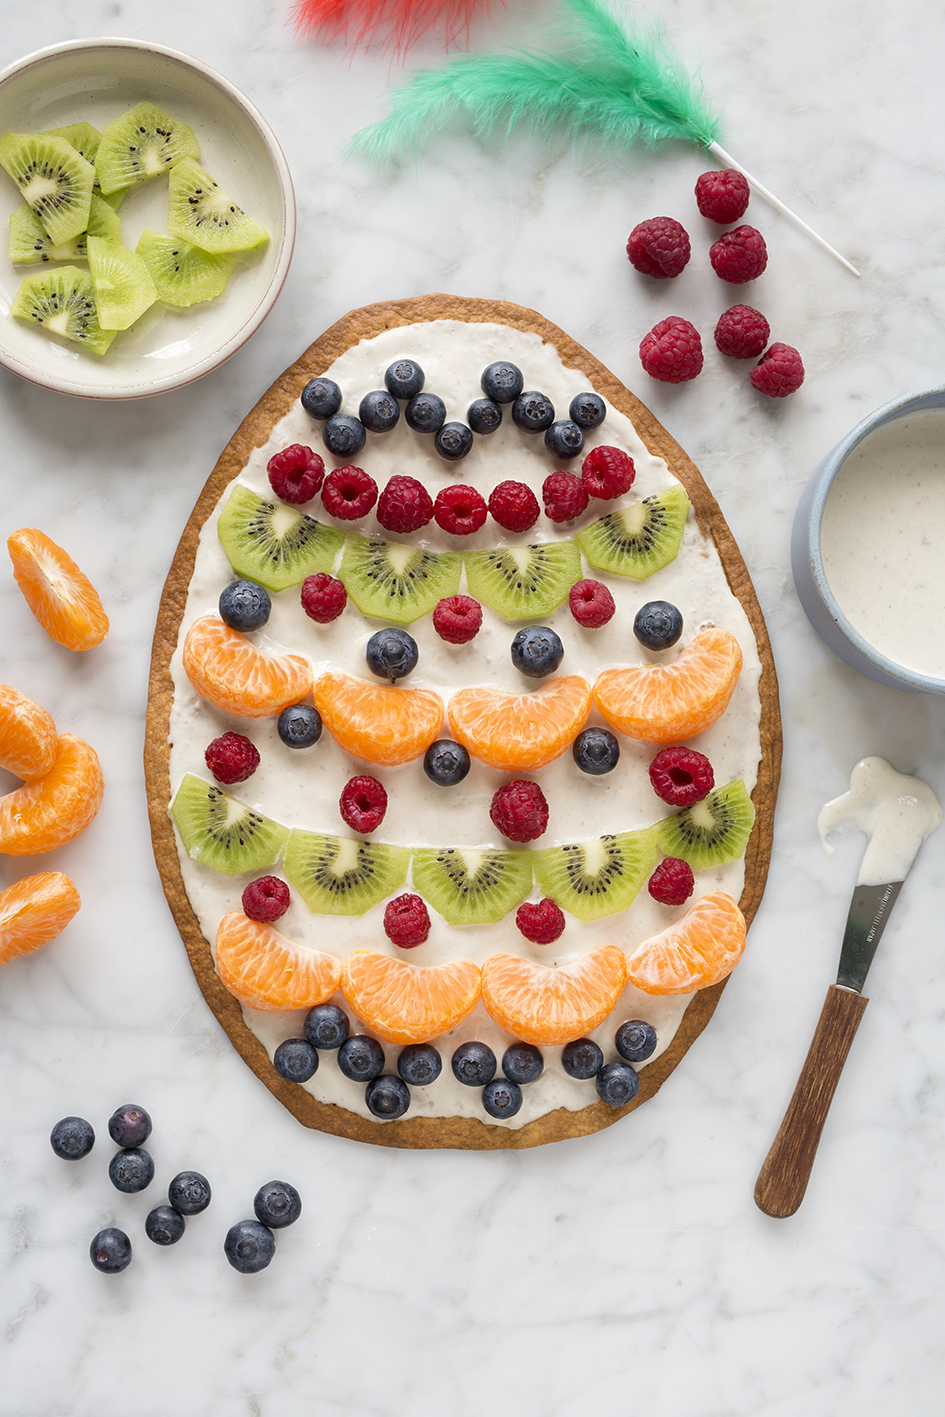 Here it is! A lighter, healthier way to celebrate Easter! This highly original creation will delight the young and not-so- young alike! #STARFineFoods